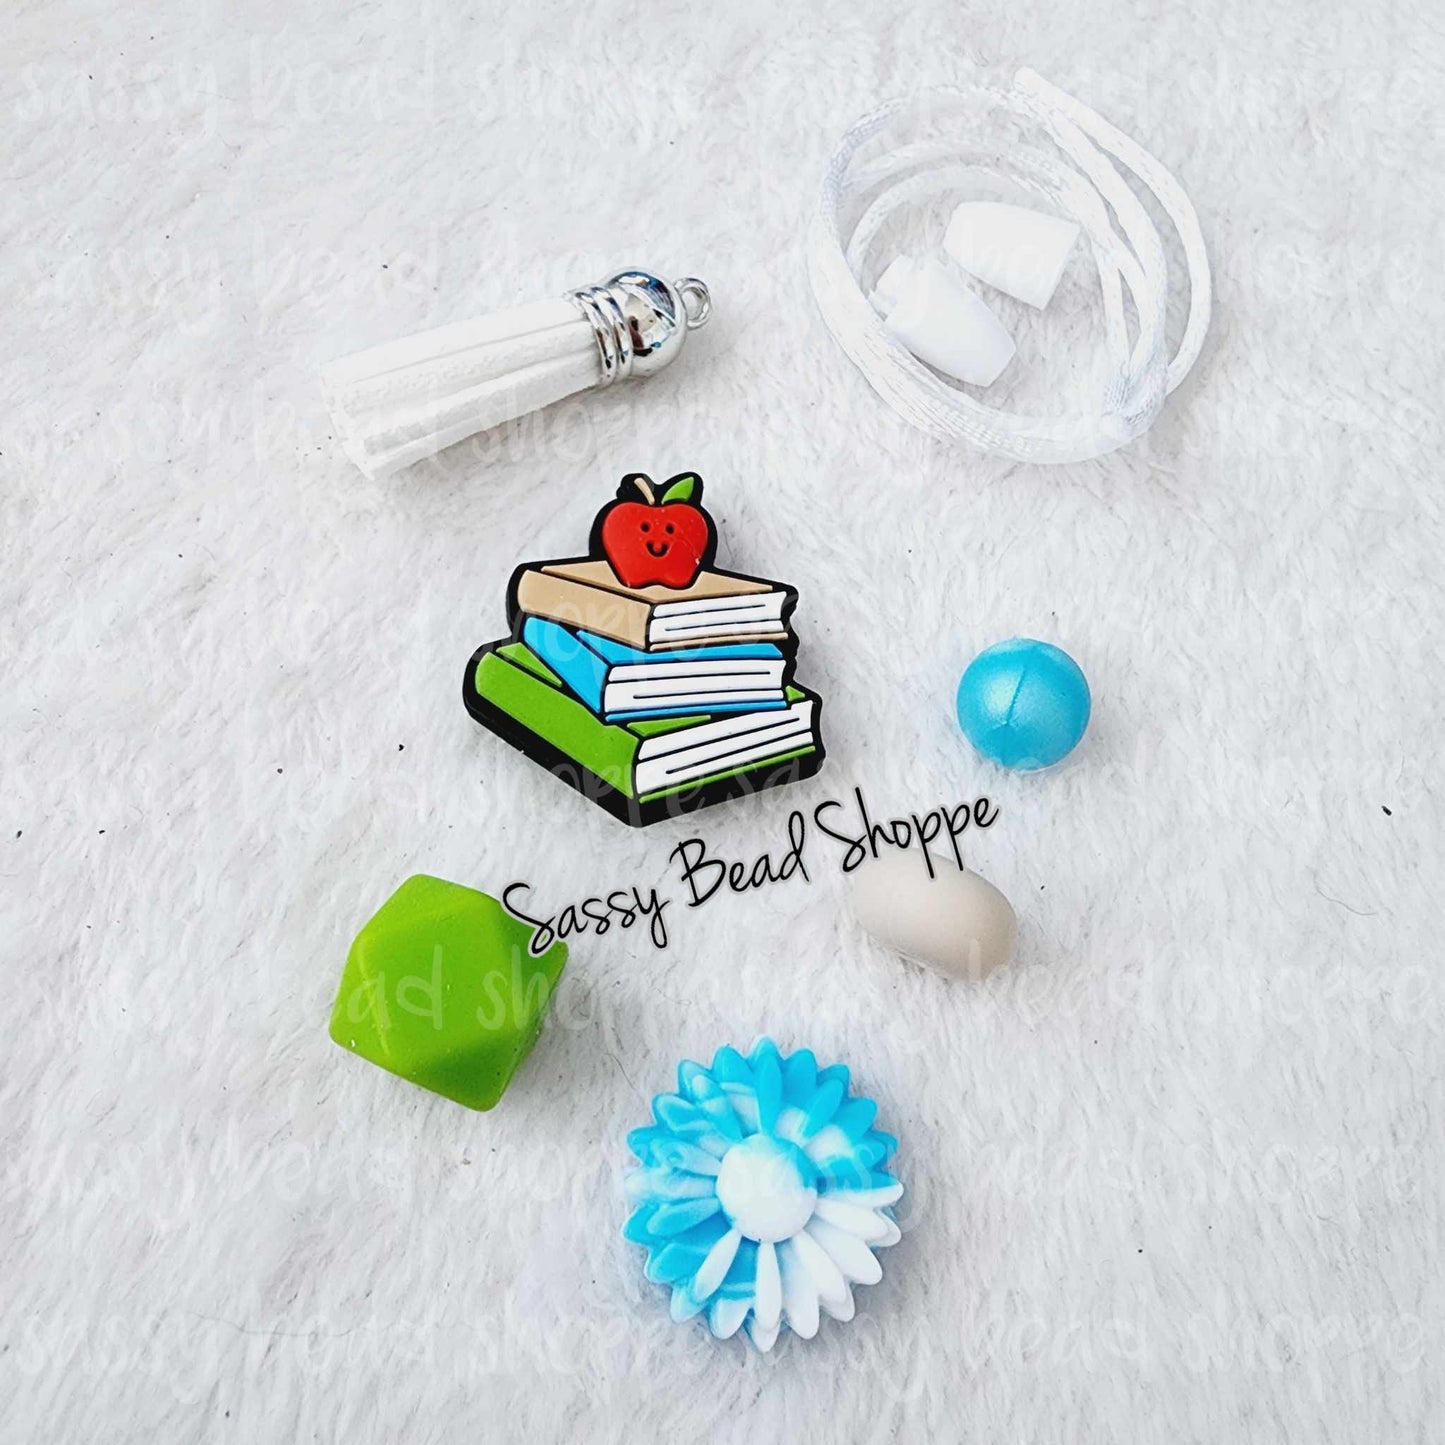 Sassy Bead Shoppe Book Smart Car Charm What you will receive in your kit